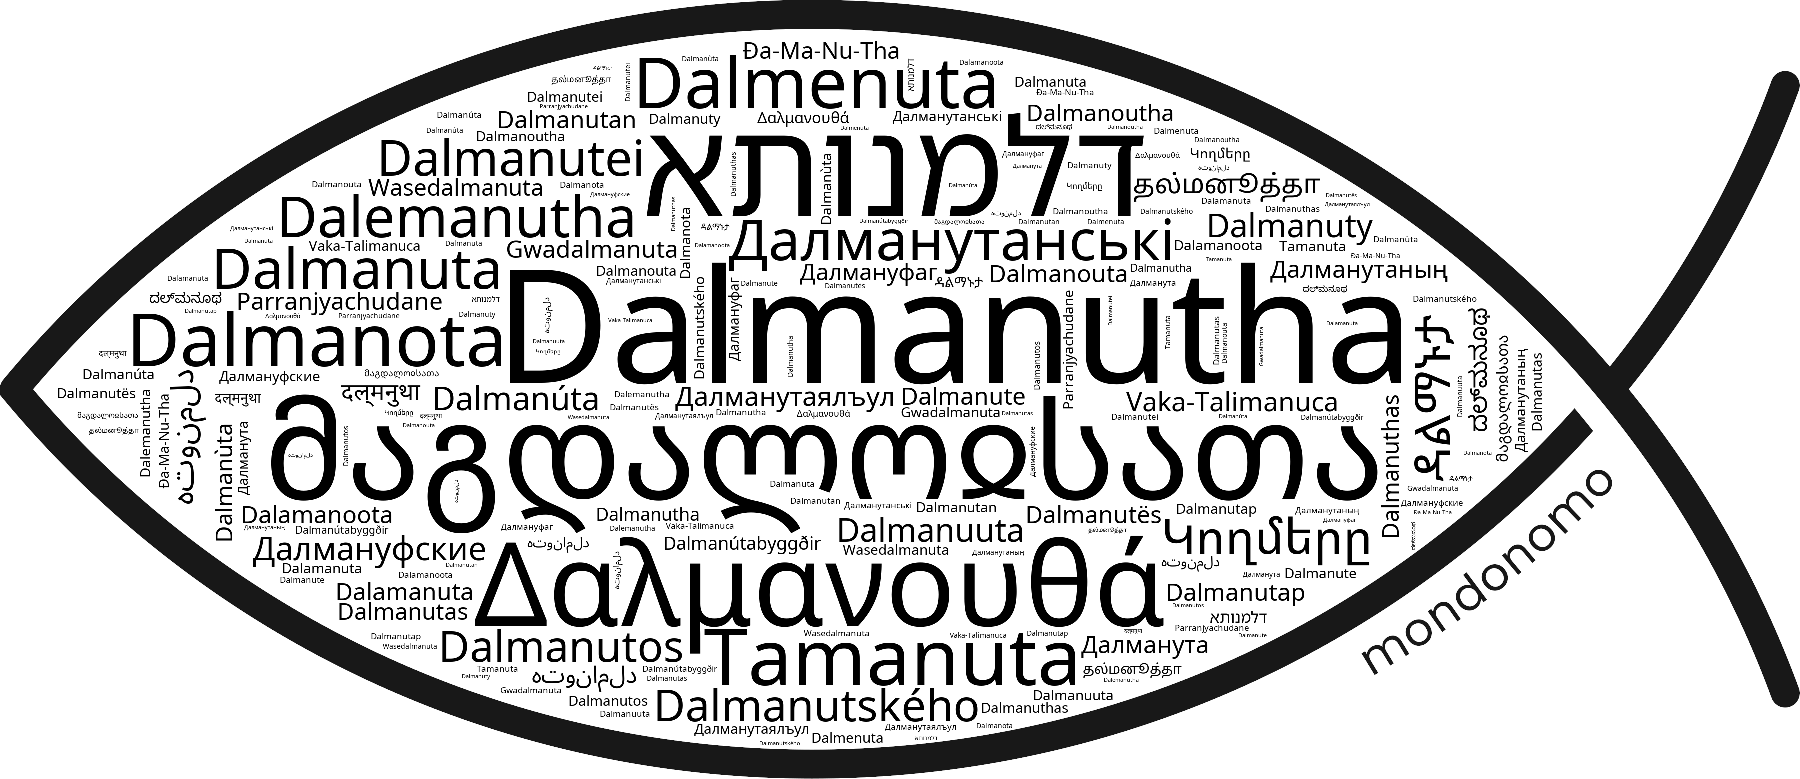 Name Dalmanutha in the world's Bibles